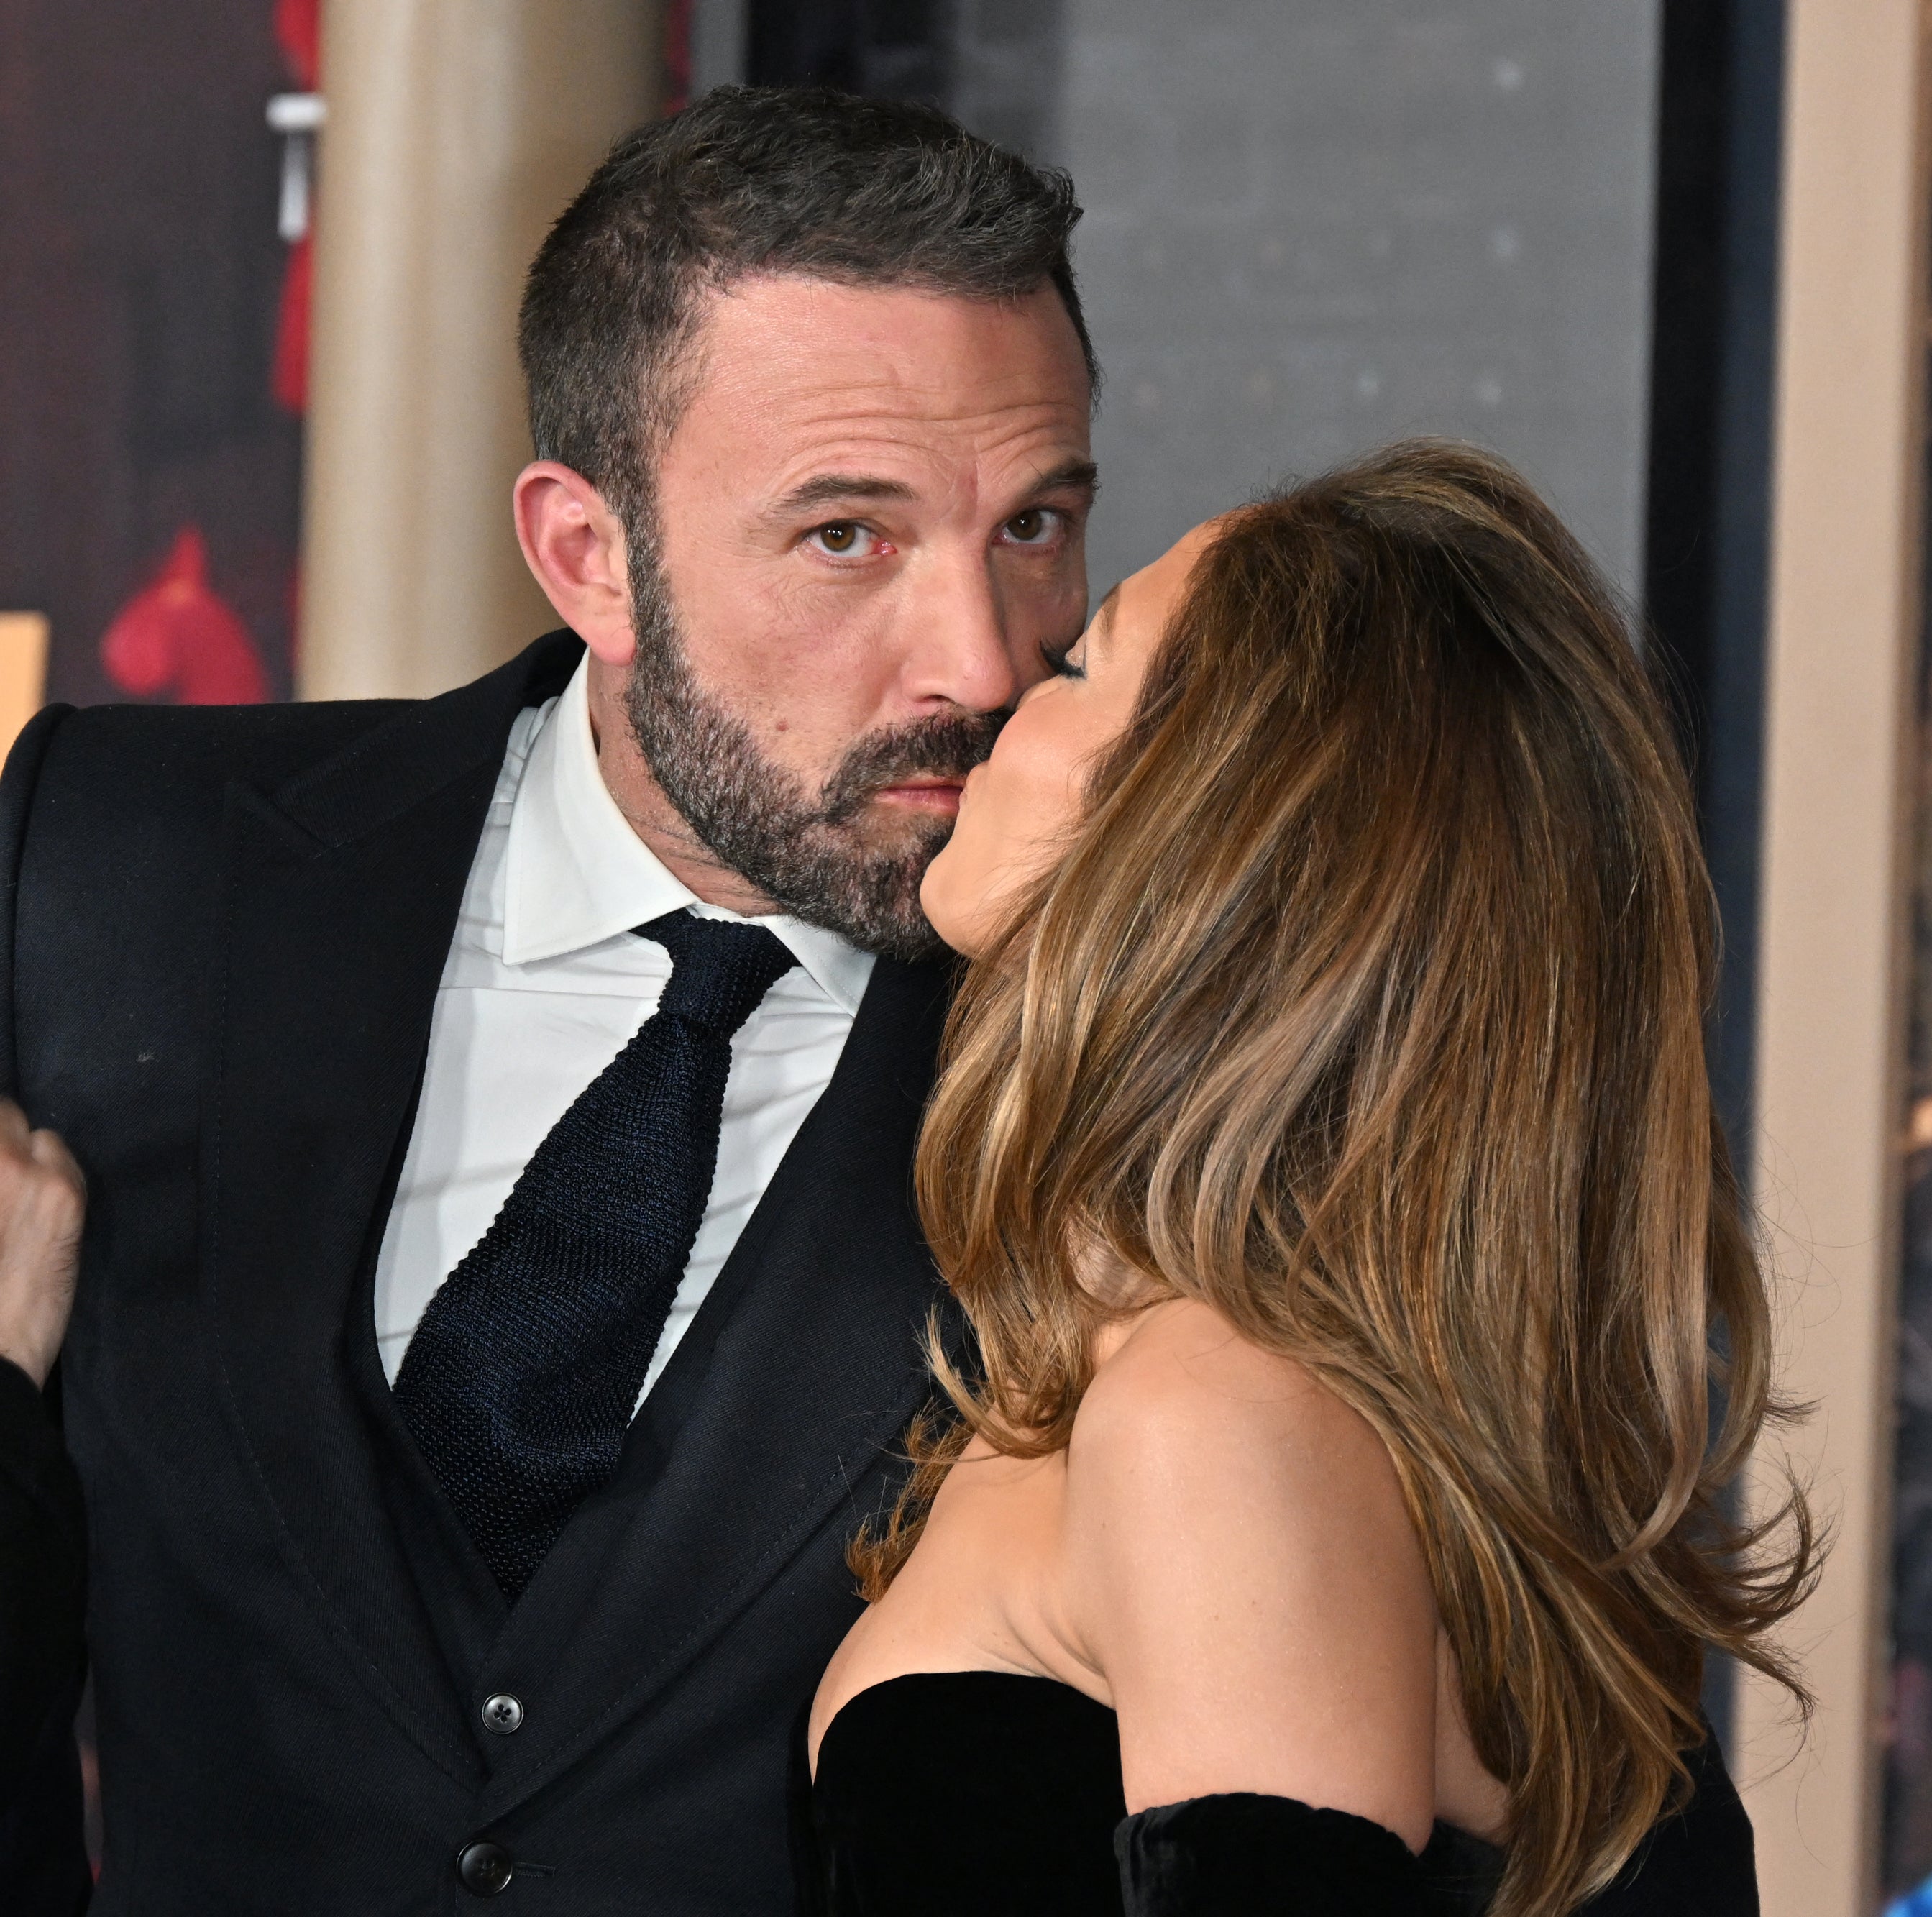 The couple sharing a kiss at an event